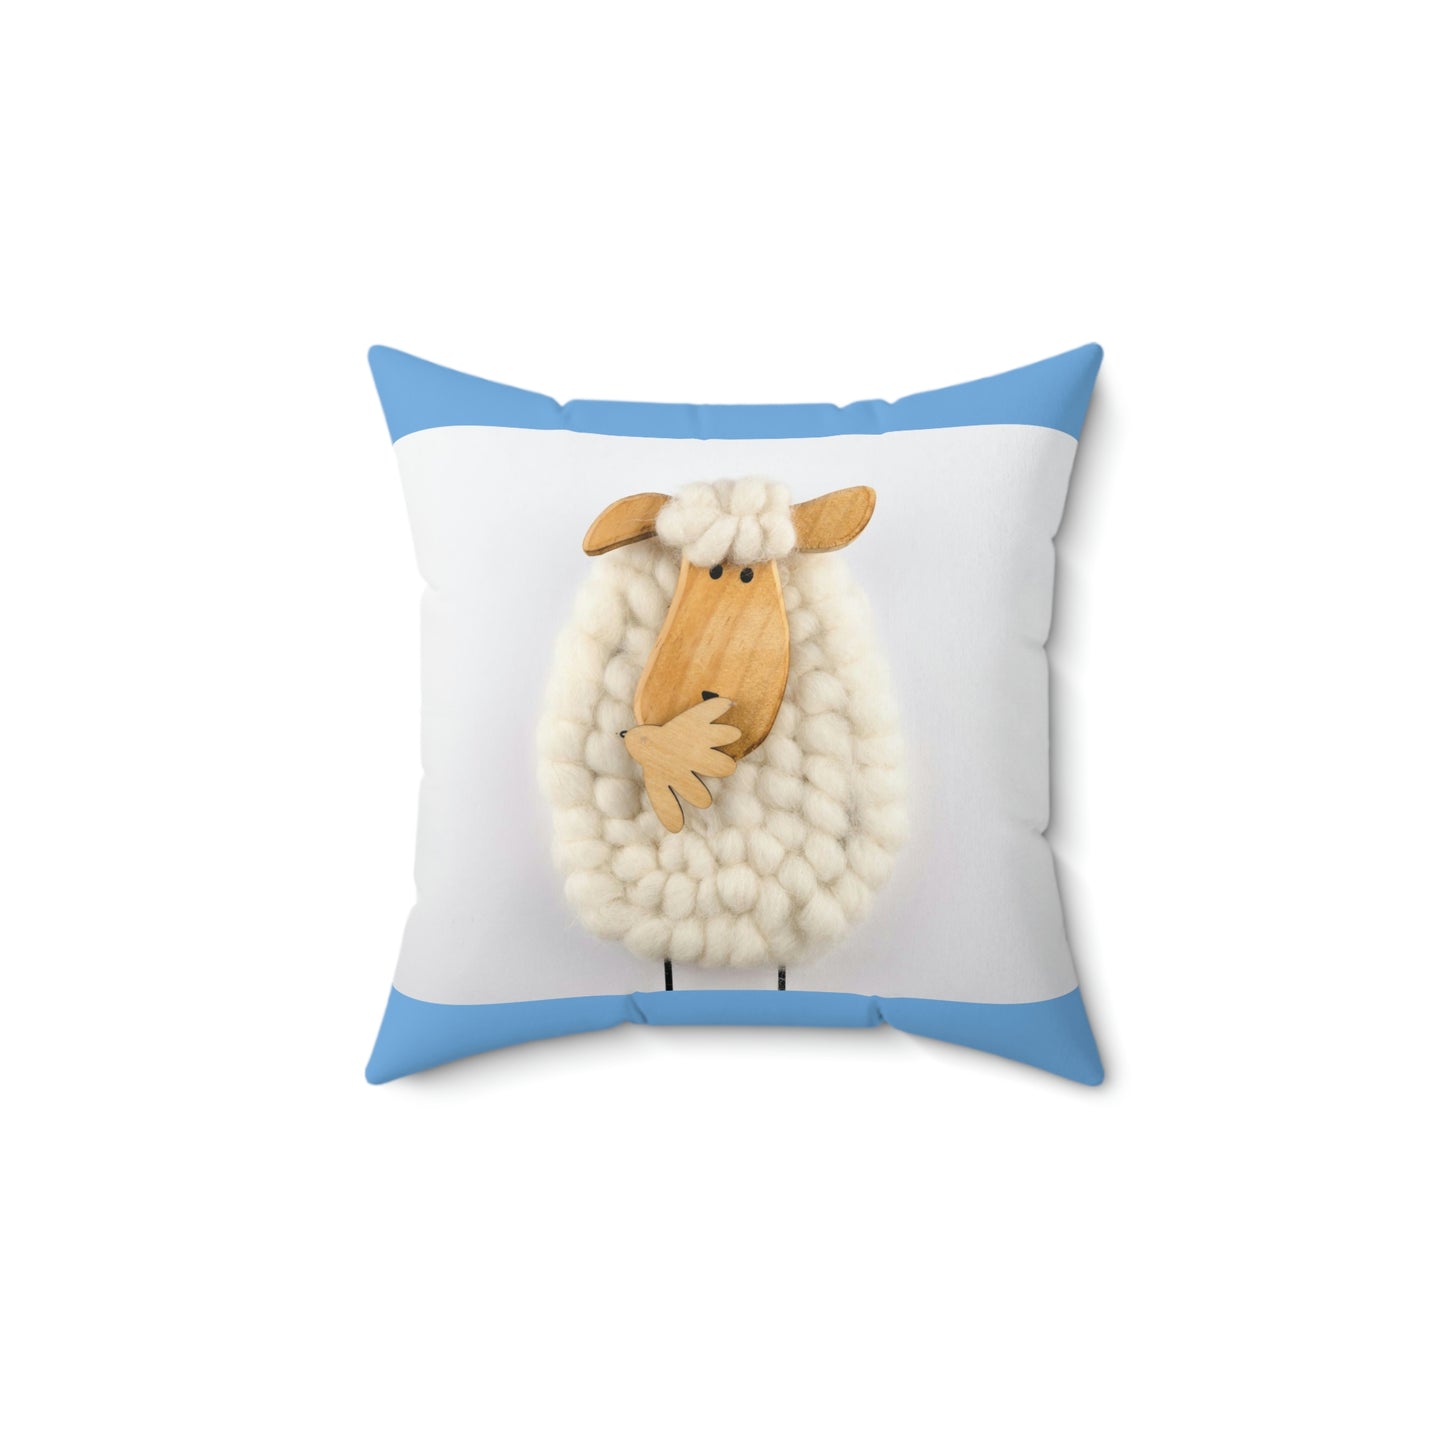 Sheep Pillow Case - Light Blue and White Colors - Faux Suede Square Pillow Case